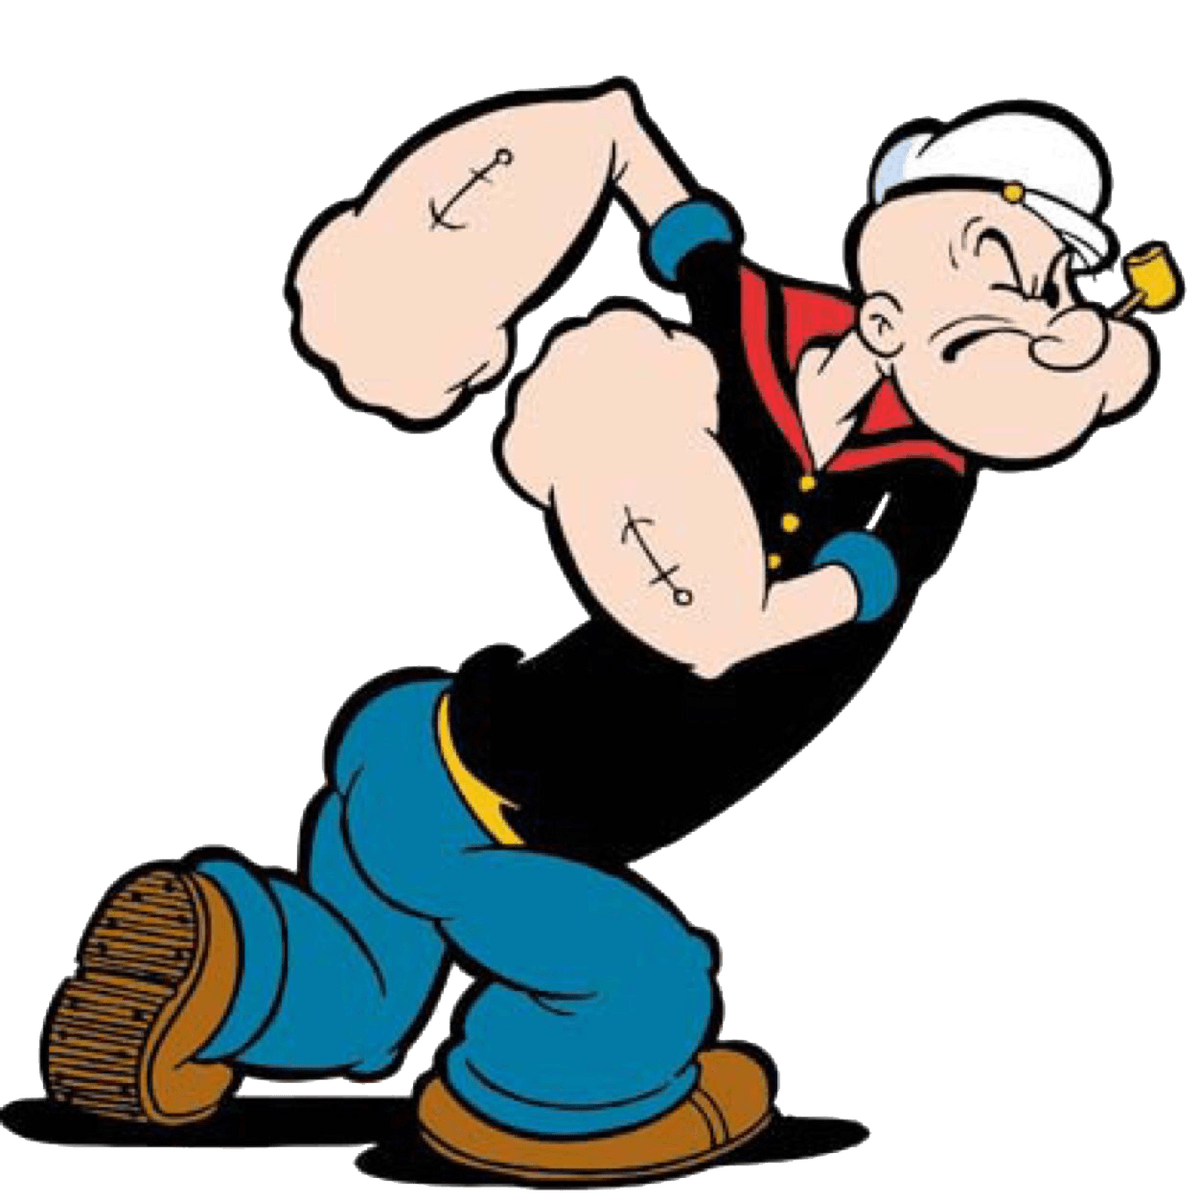 Image popeye png the. Sailor clipart olive oyl